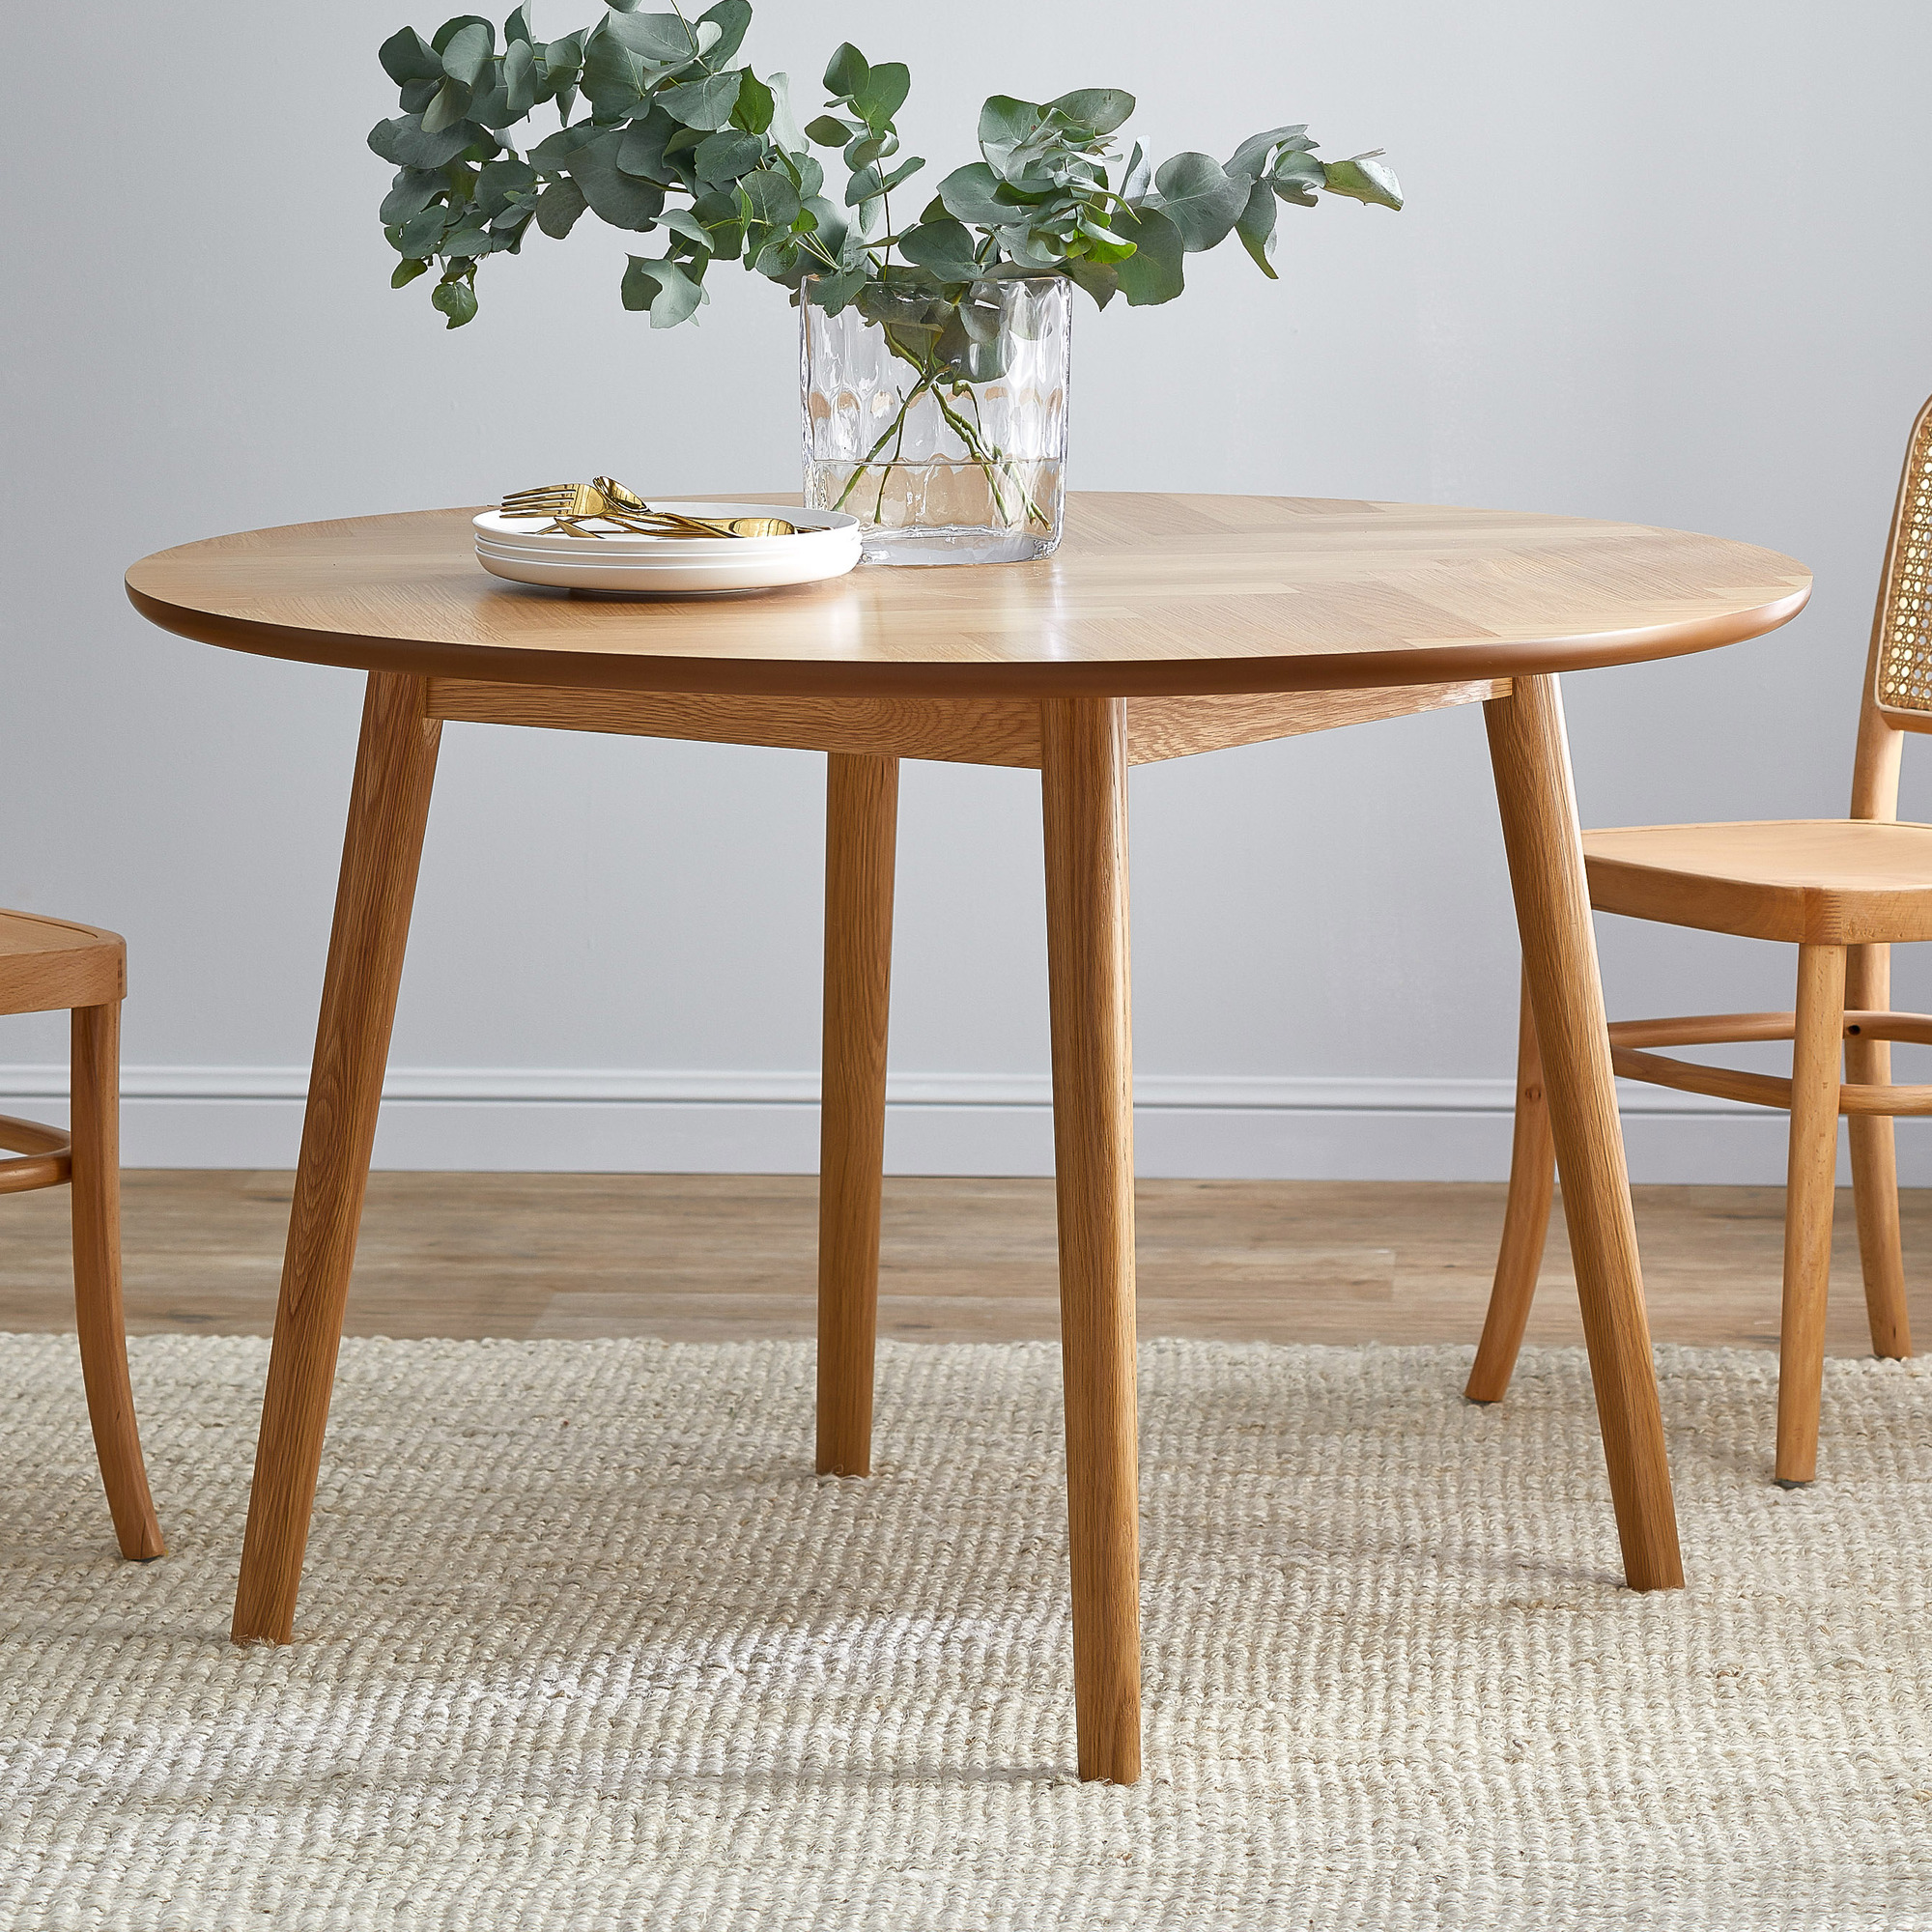 Webster Dion Parquet Round Dining Table, Round Dining Tables 100cm